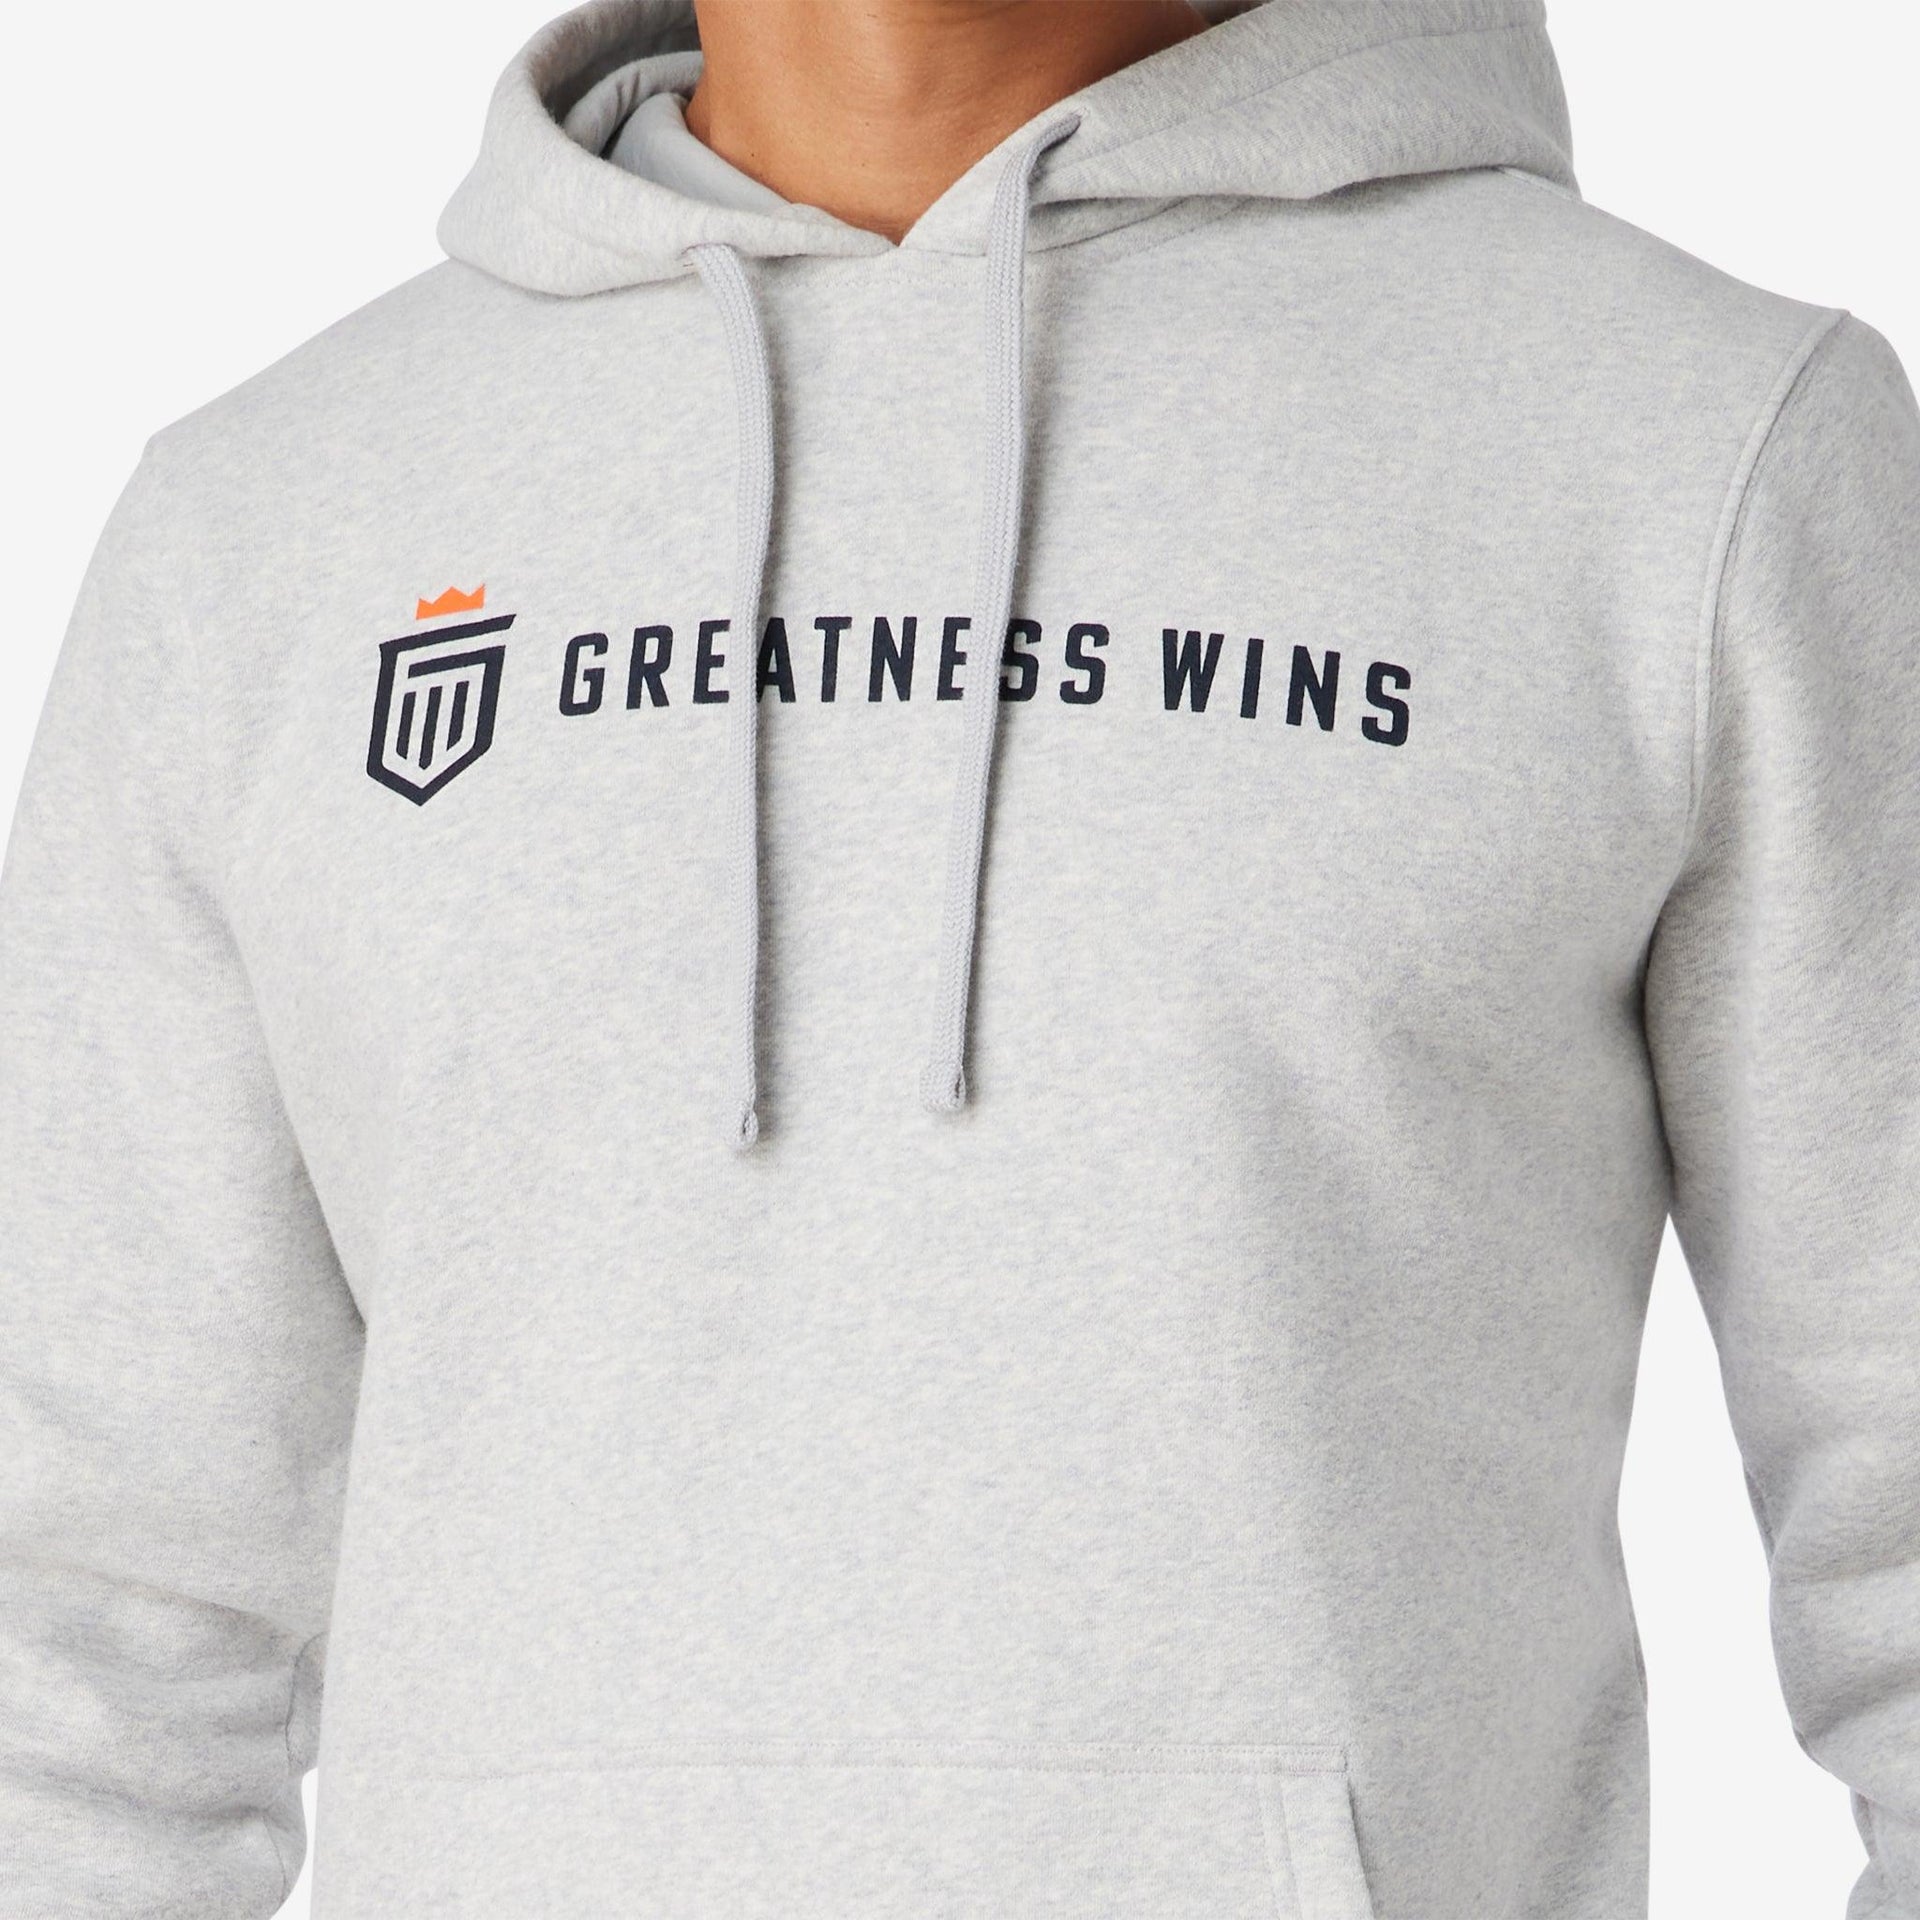 LOGO GRAPHIC HOODIE - Greatness Wins